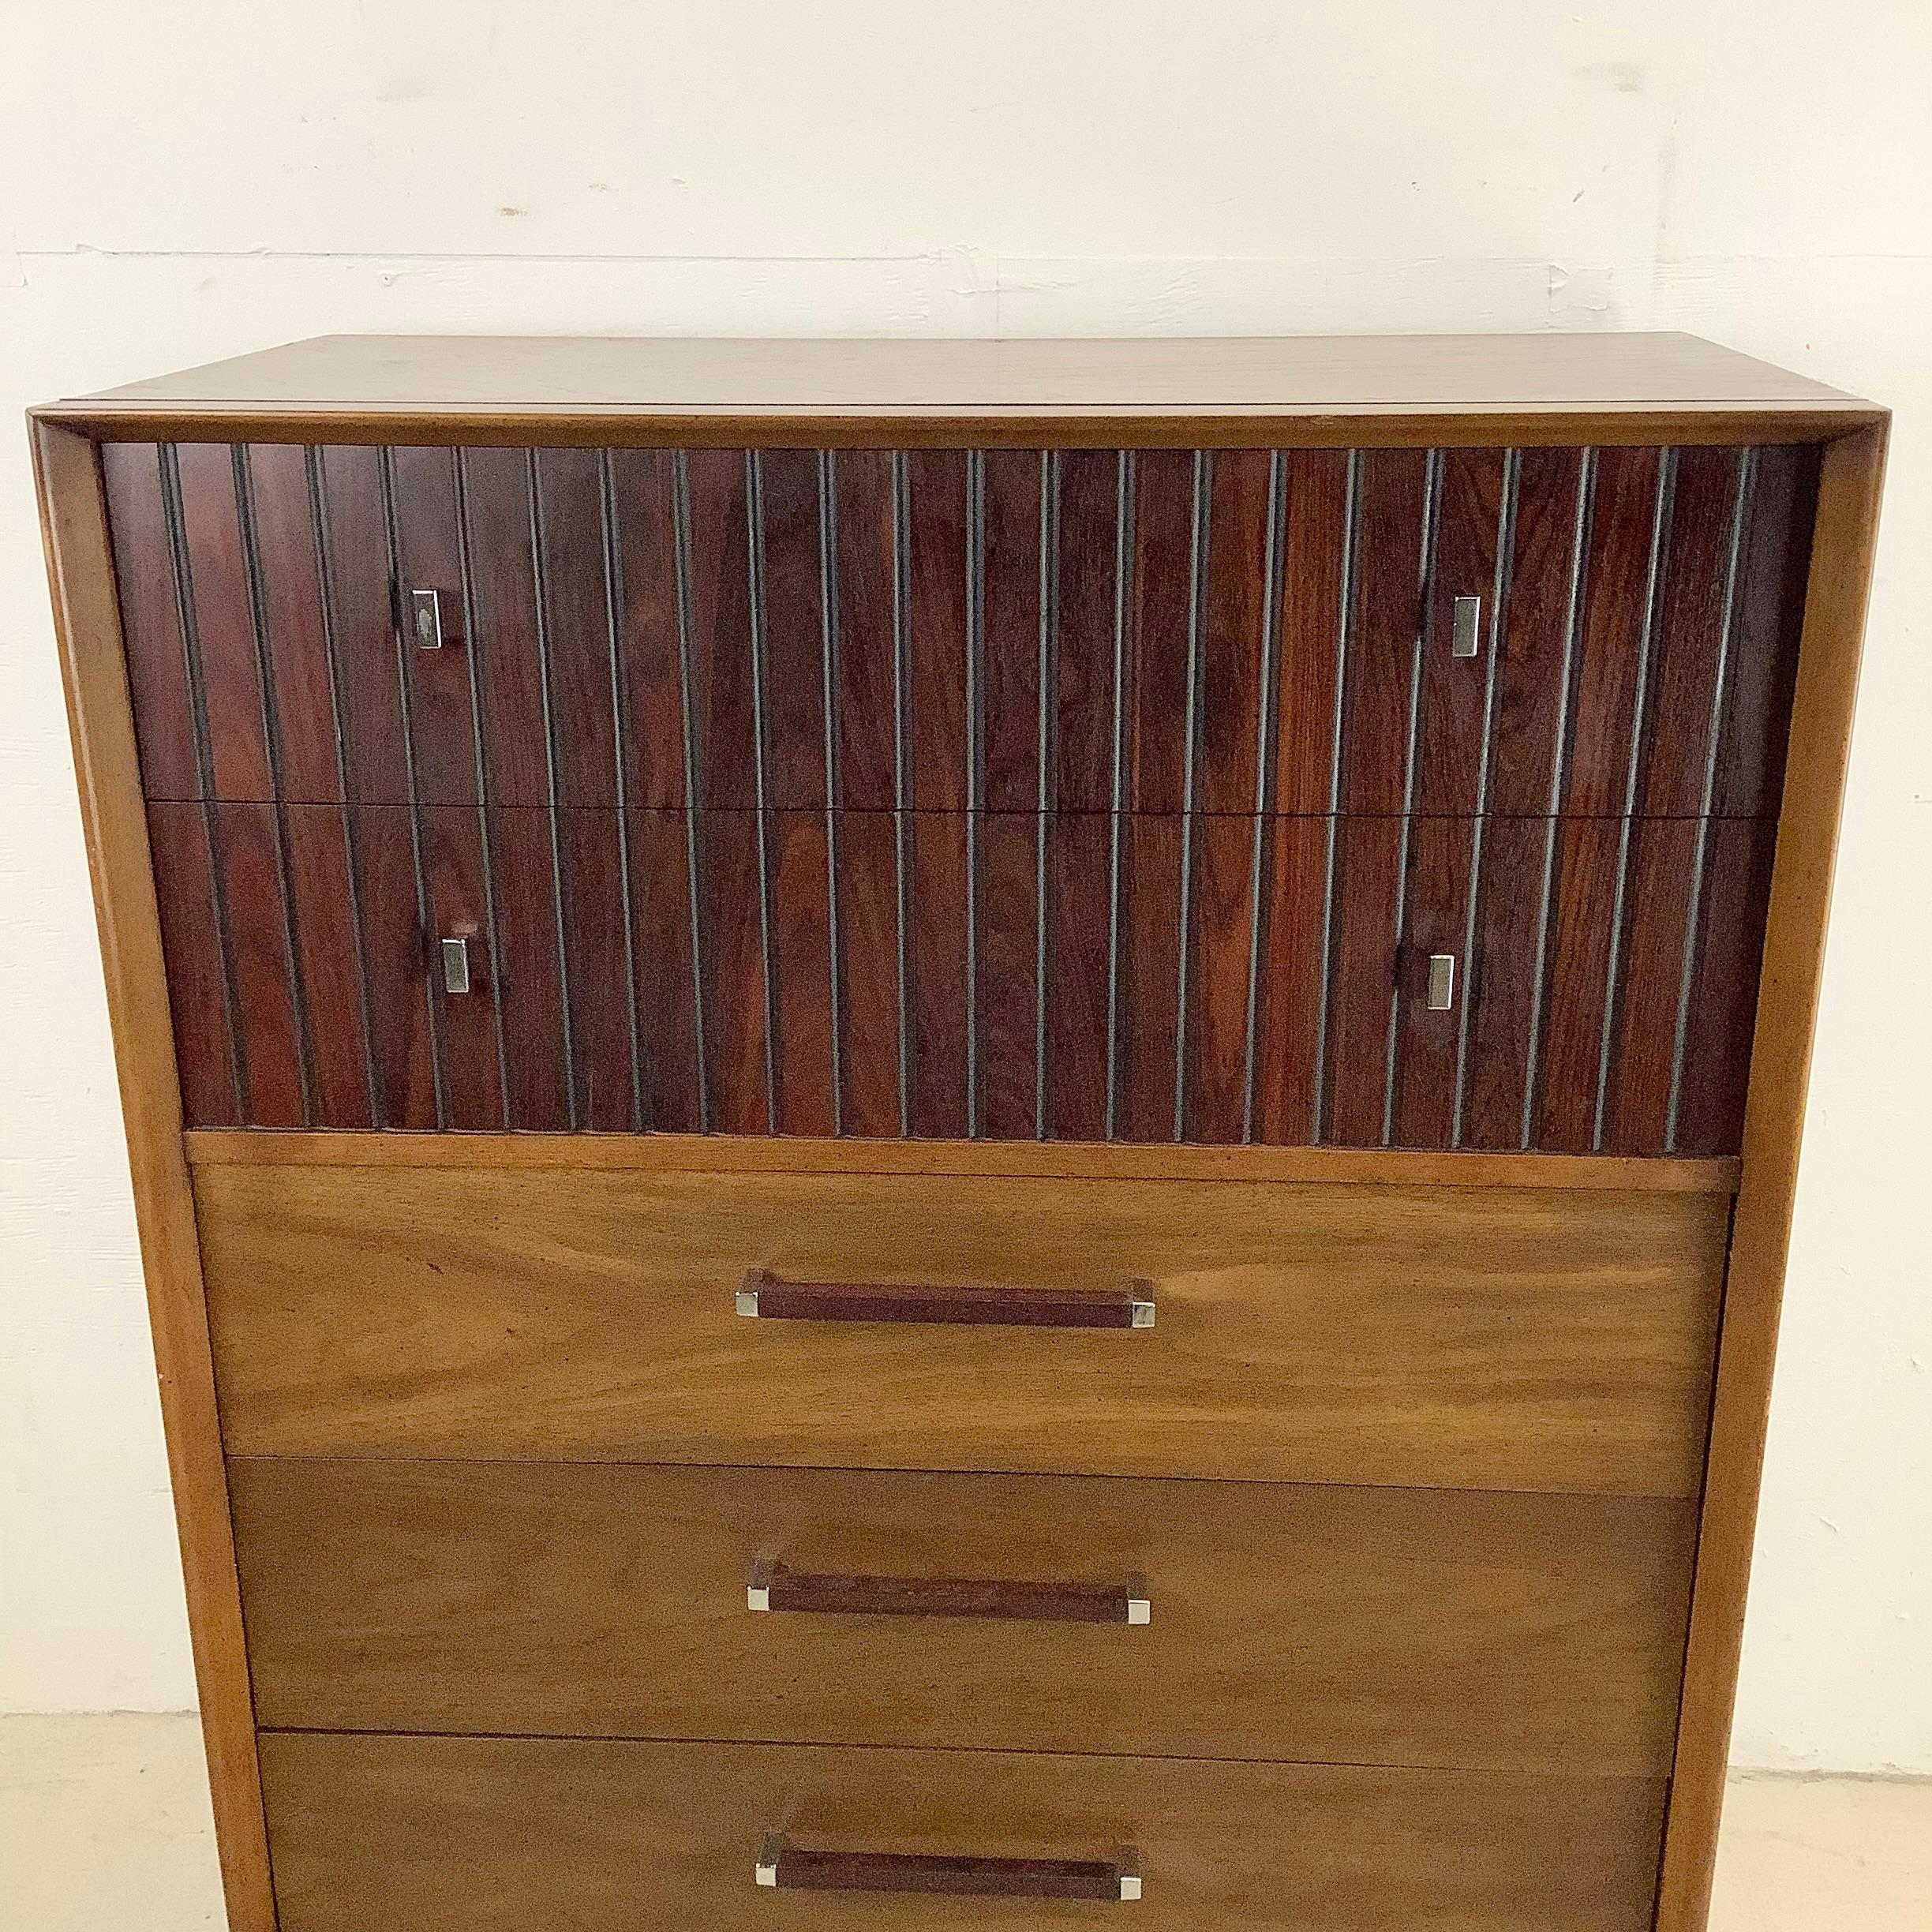 American Mid-Century Highboy Dresser with Chrome Handles by Lane Furniture